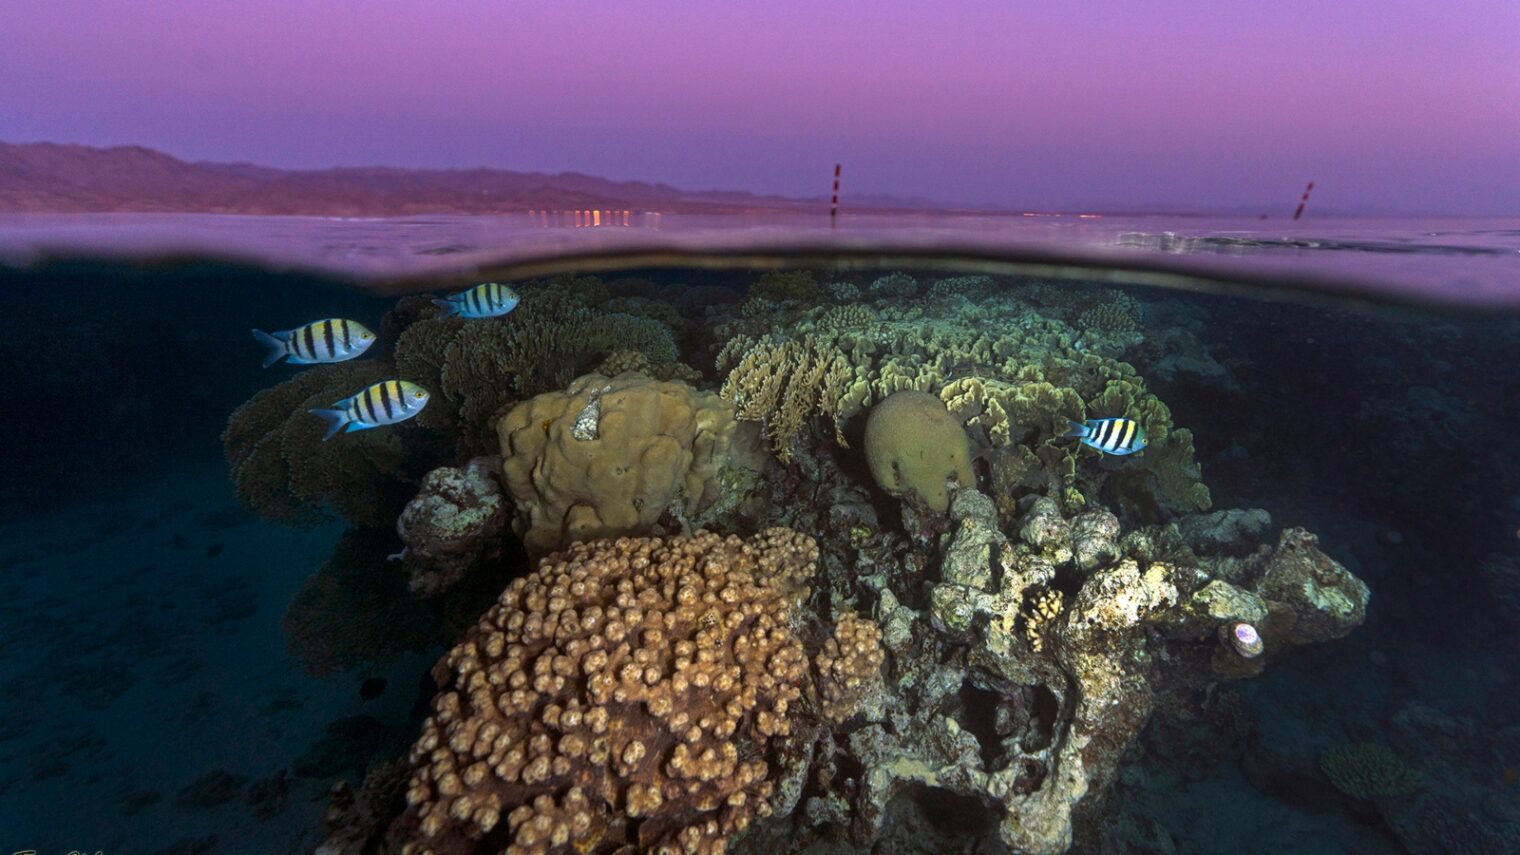 A coral reef at night in the Gulf of Eilat. Photo by Tom Shlesinger